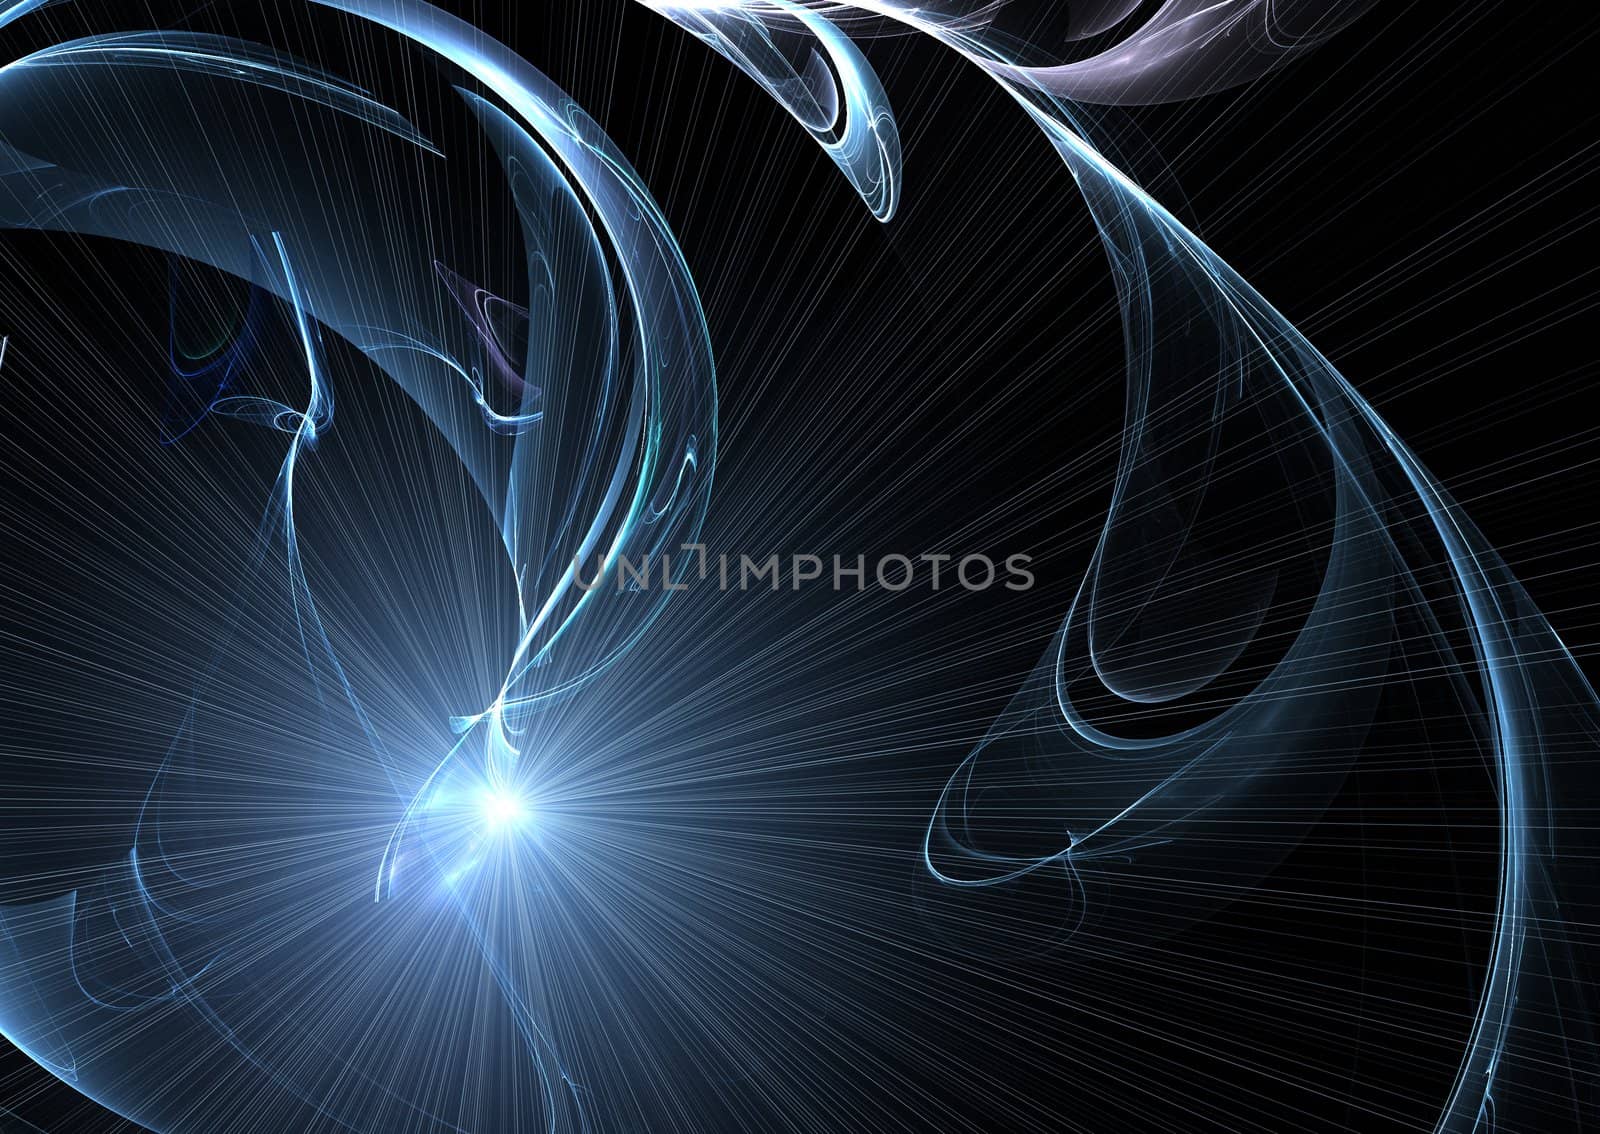 Abstract and futuristic background - fractal illustration